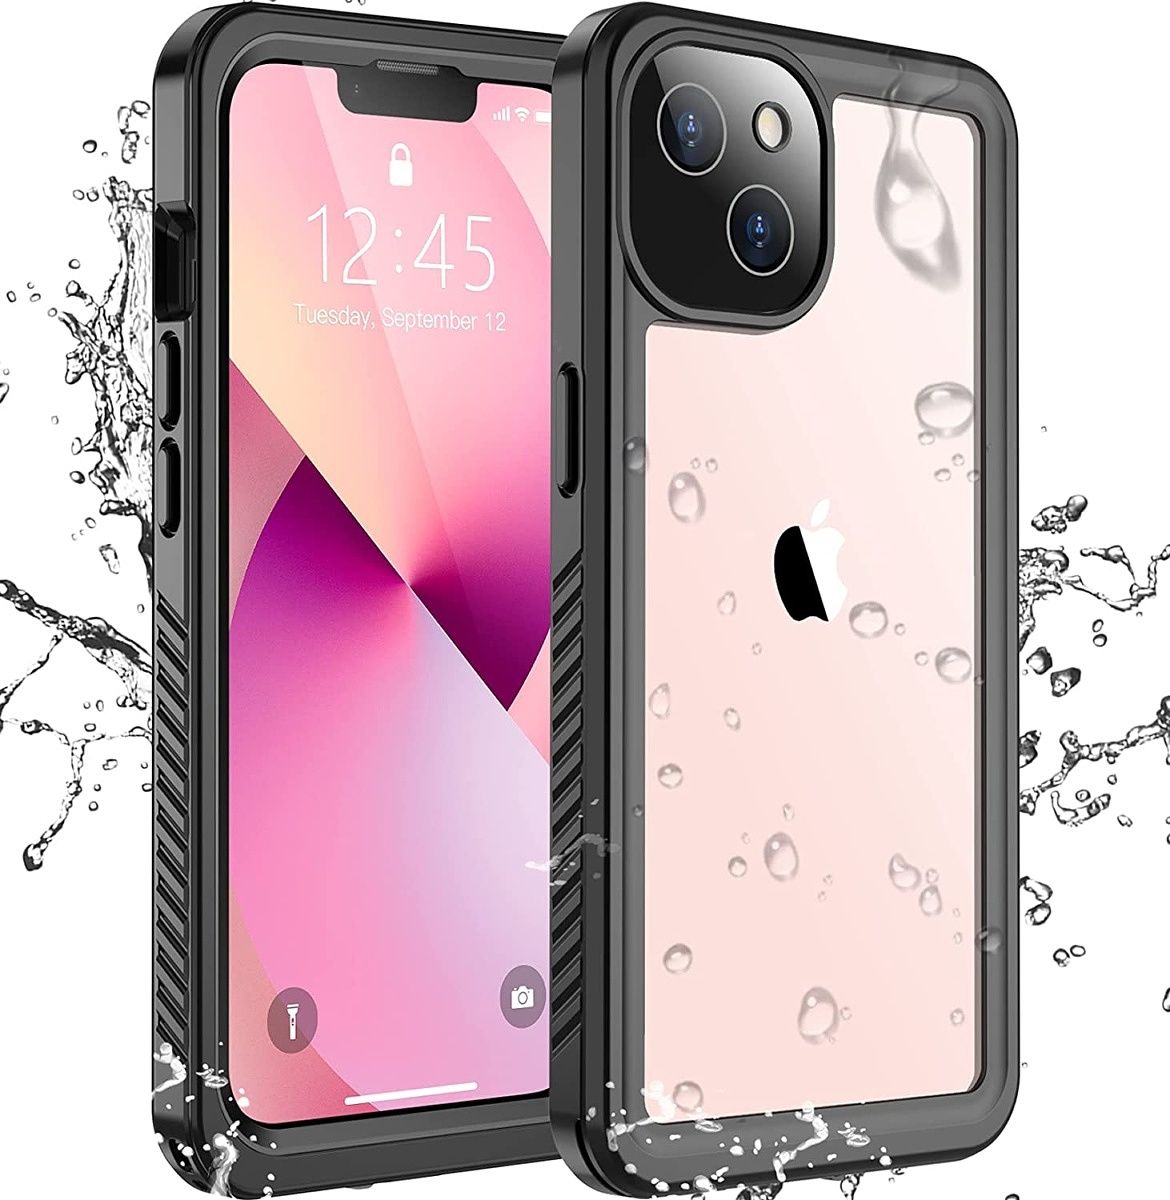 The iPhone 13 series is water-resistant but this case adds an extra layer of safety and makes it waterproof. It's a rugged case with an in-built screen protector that provides ample protection.